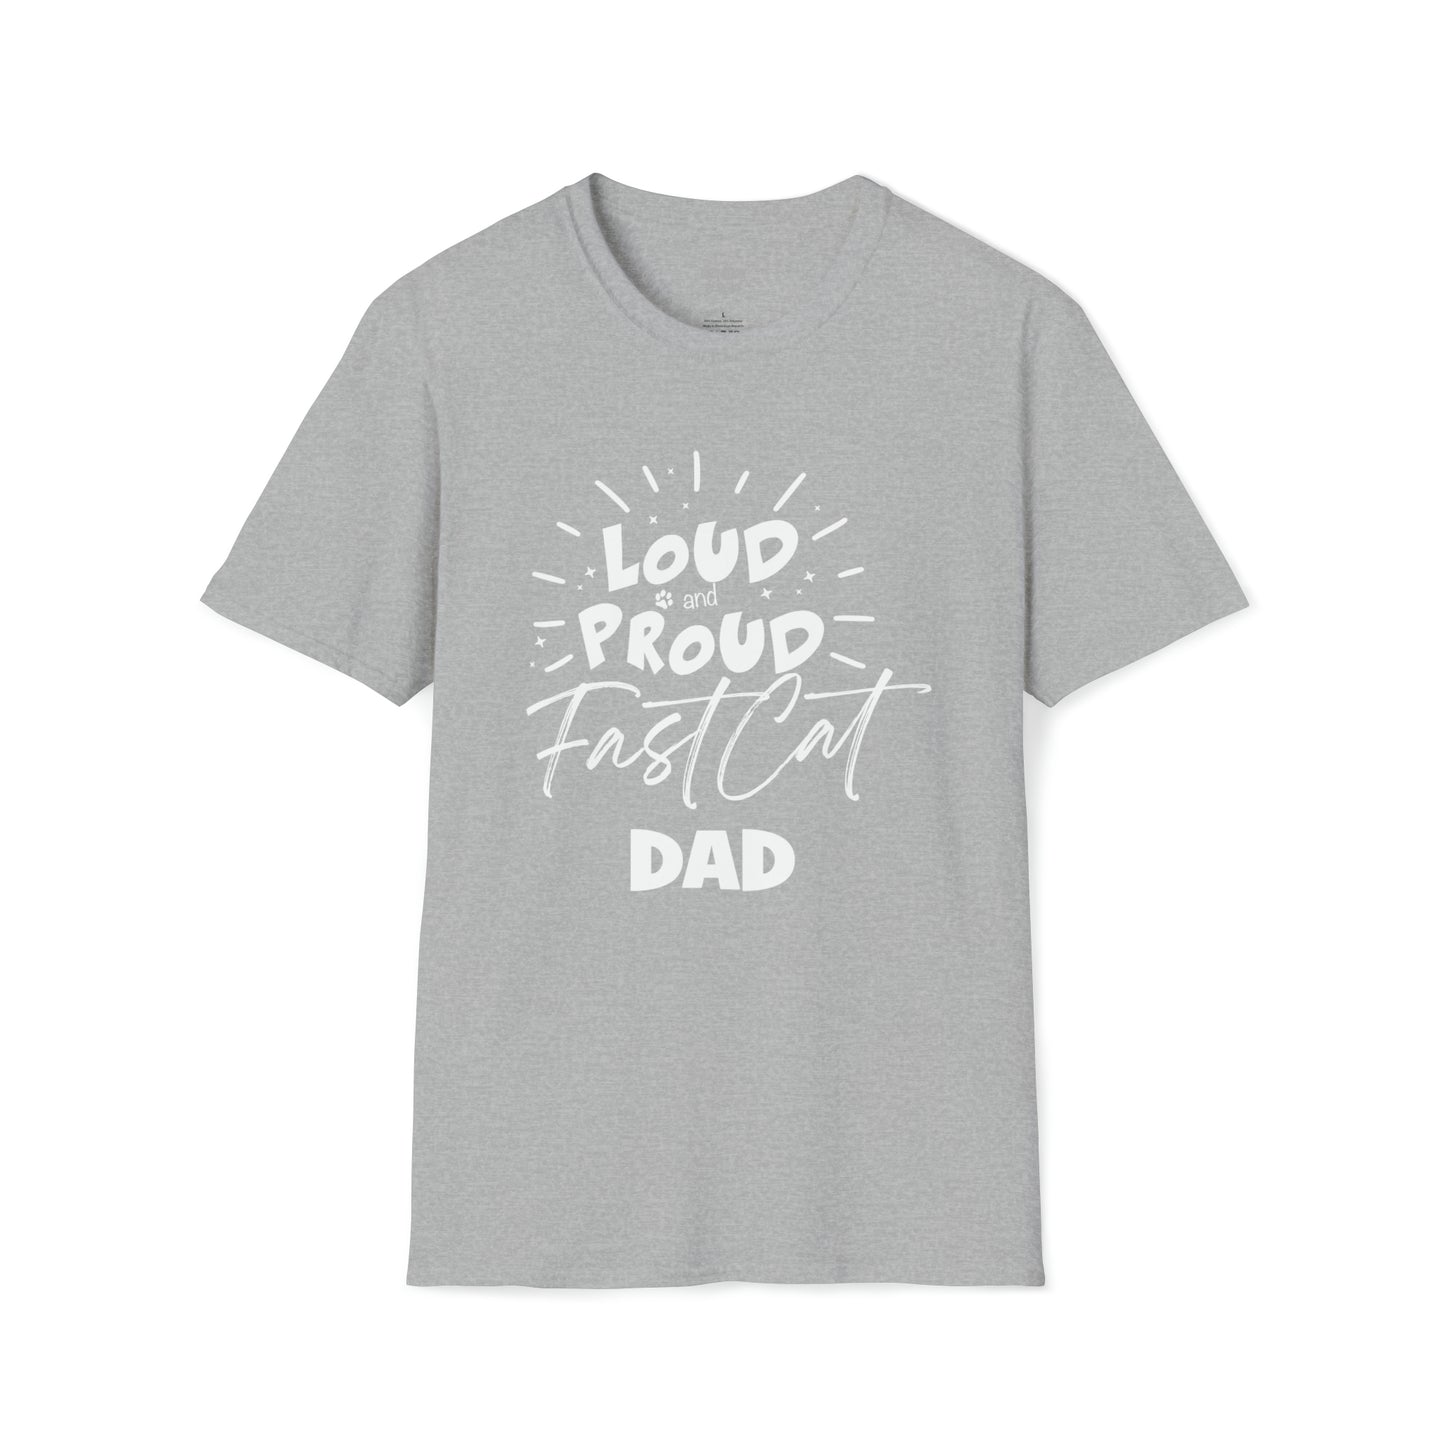 2 LOUD PROUD FAST CAT DAD -  Unisex Softstyle T-Shirt